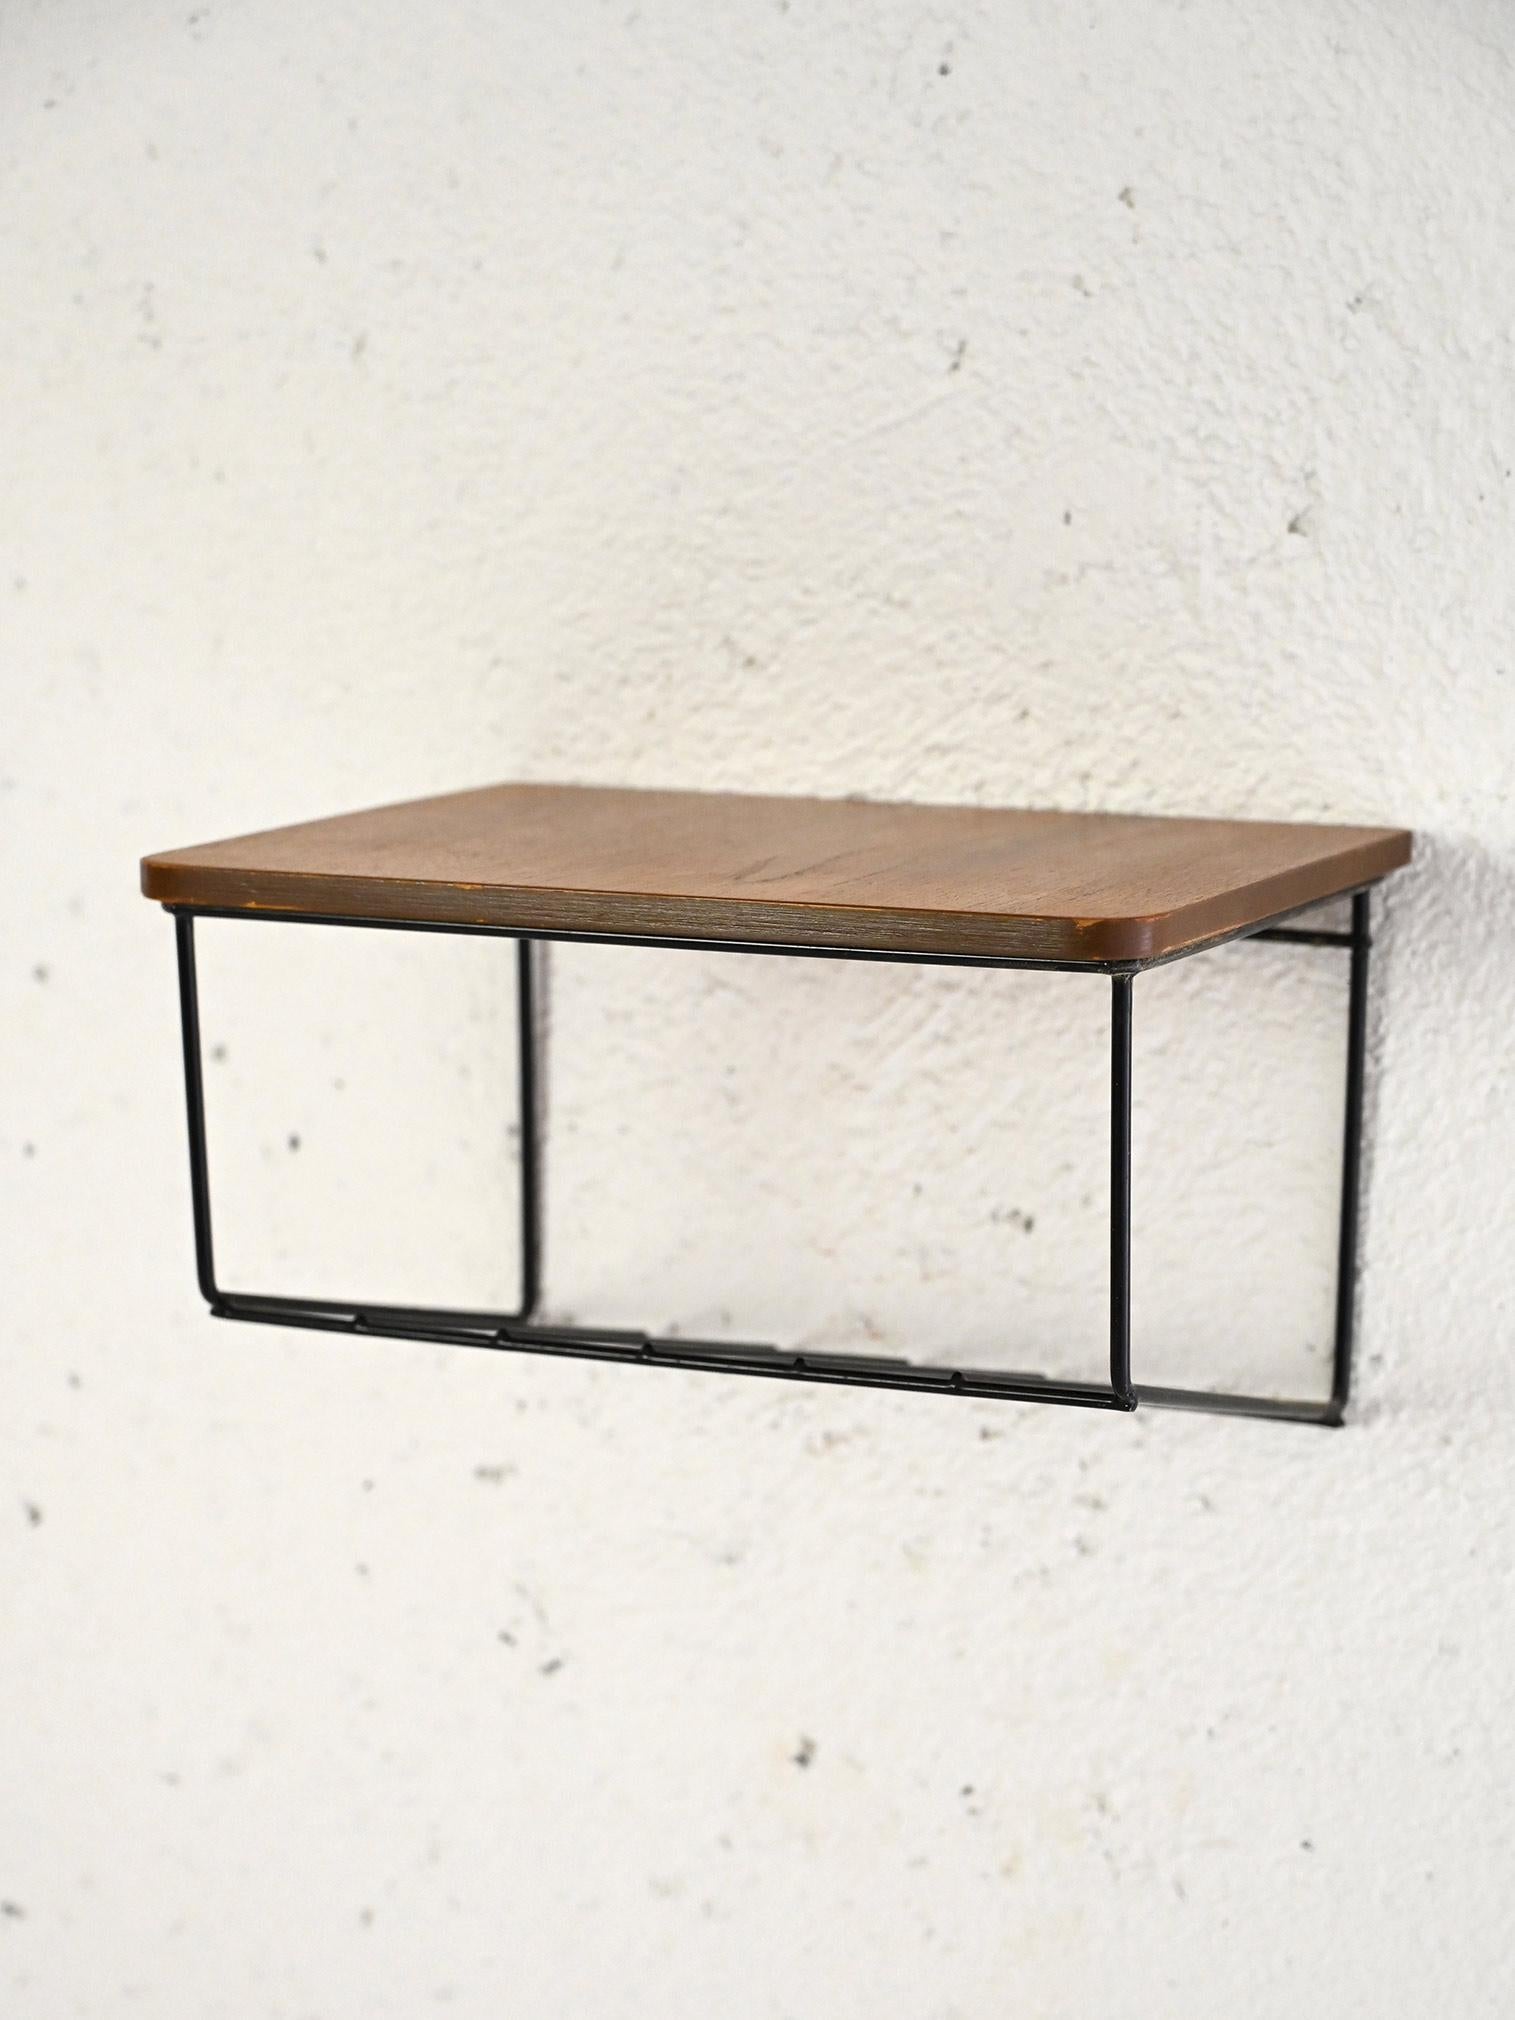 Original Scandinavian-made shelf from the 1960s.

A simple and functional industrial-style furniture piece consisting of a metal shelf frame and a rectangular teak countertop. 
Ideal as a bedside table but also as a shelf for the entryway or